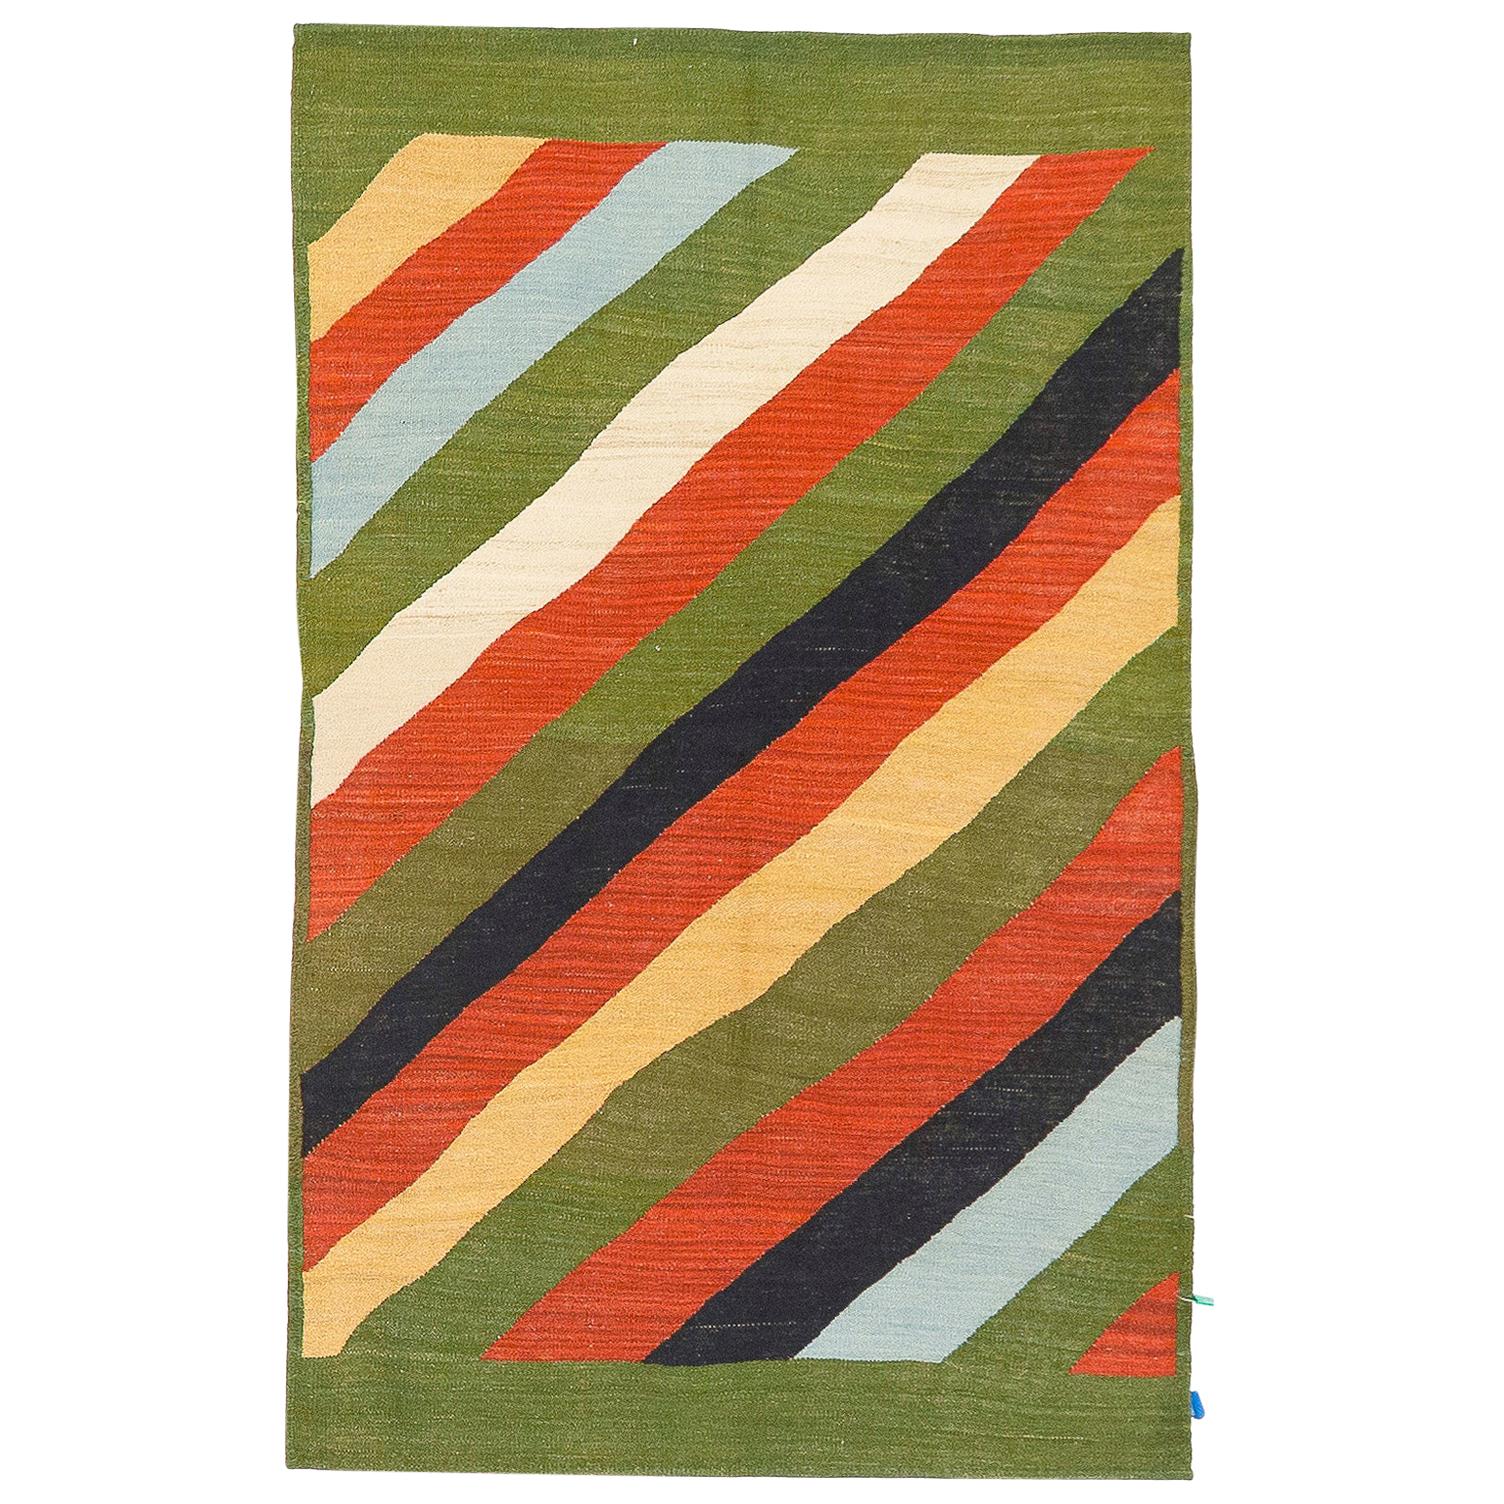 Modern Persian Kilim Style Rug with Diagonal Colored Stripes on Green Field For Sale